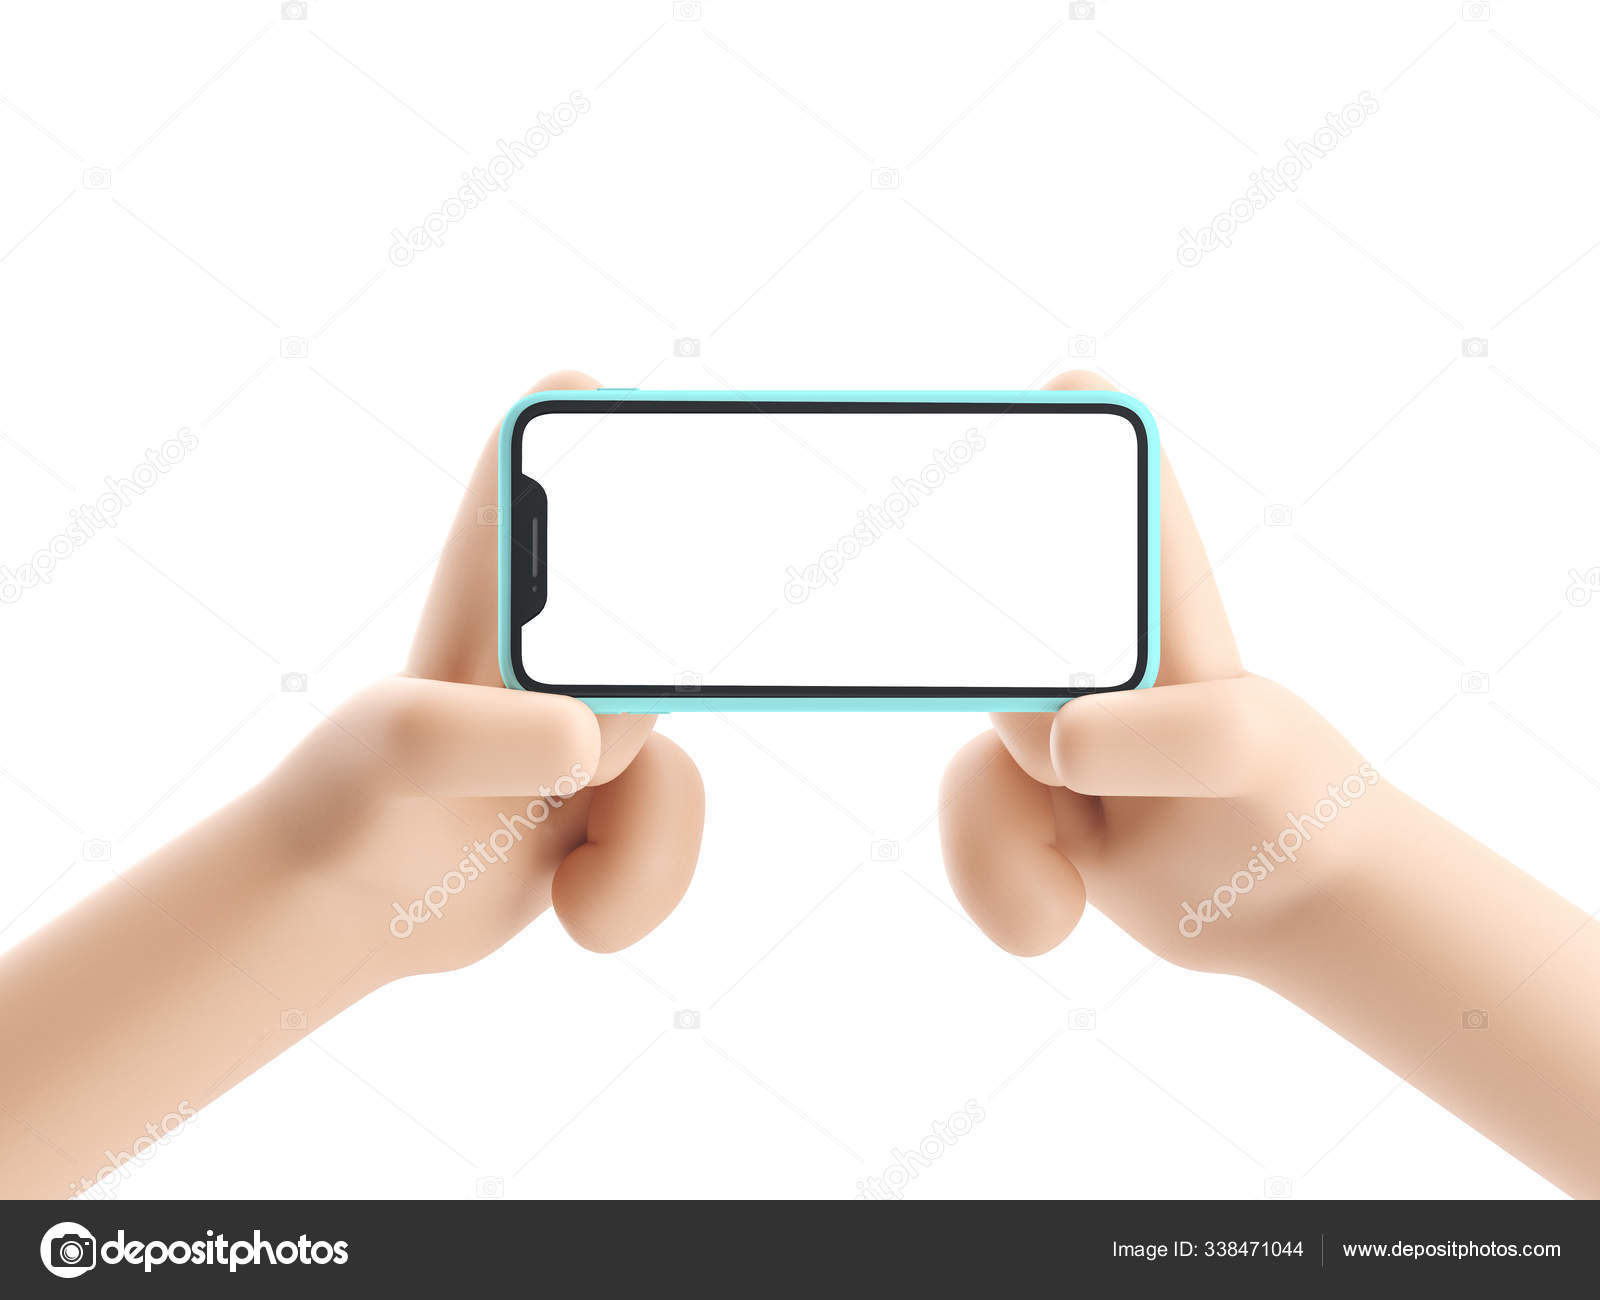 Cartoon device Mockup. Cartoon hand holding phone on white background. 3d  illustration. Stock Photo by ©bestpixels 338471044